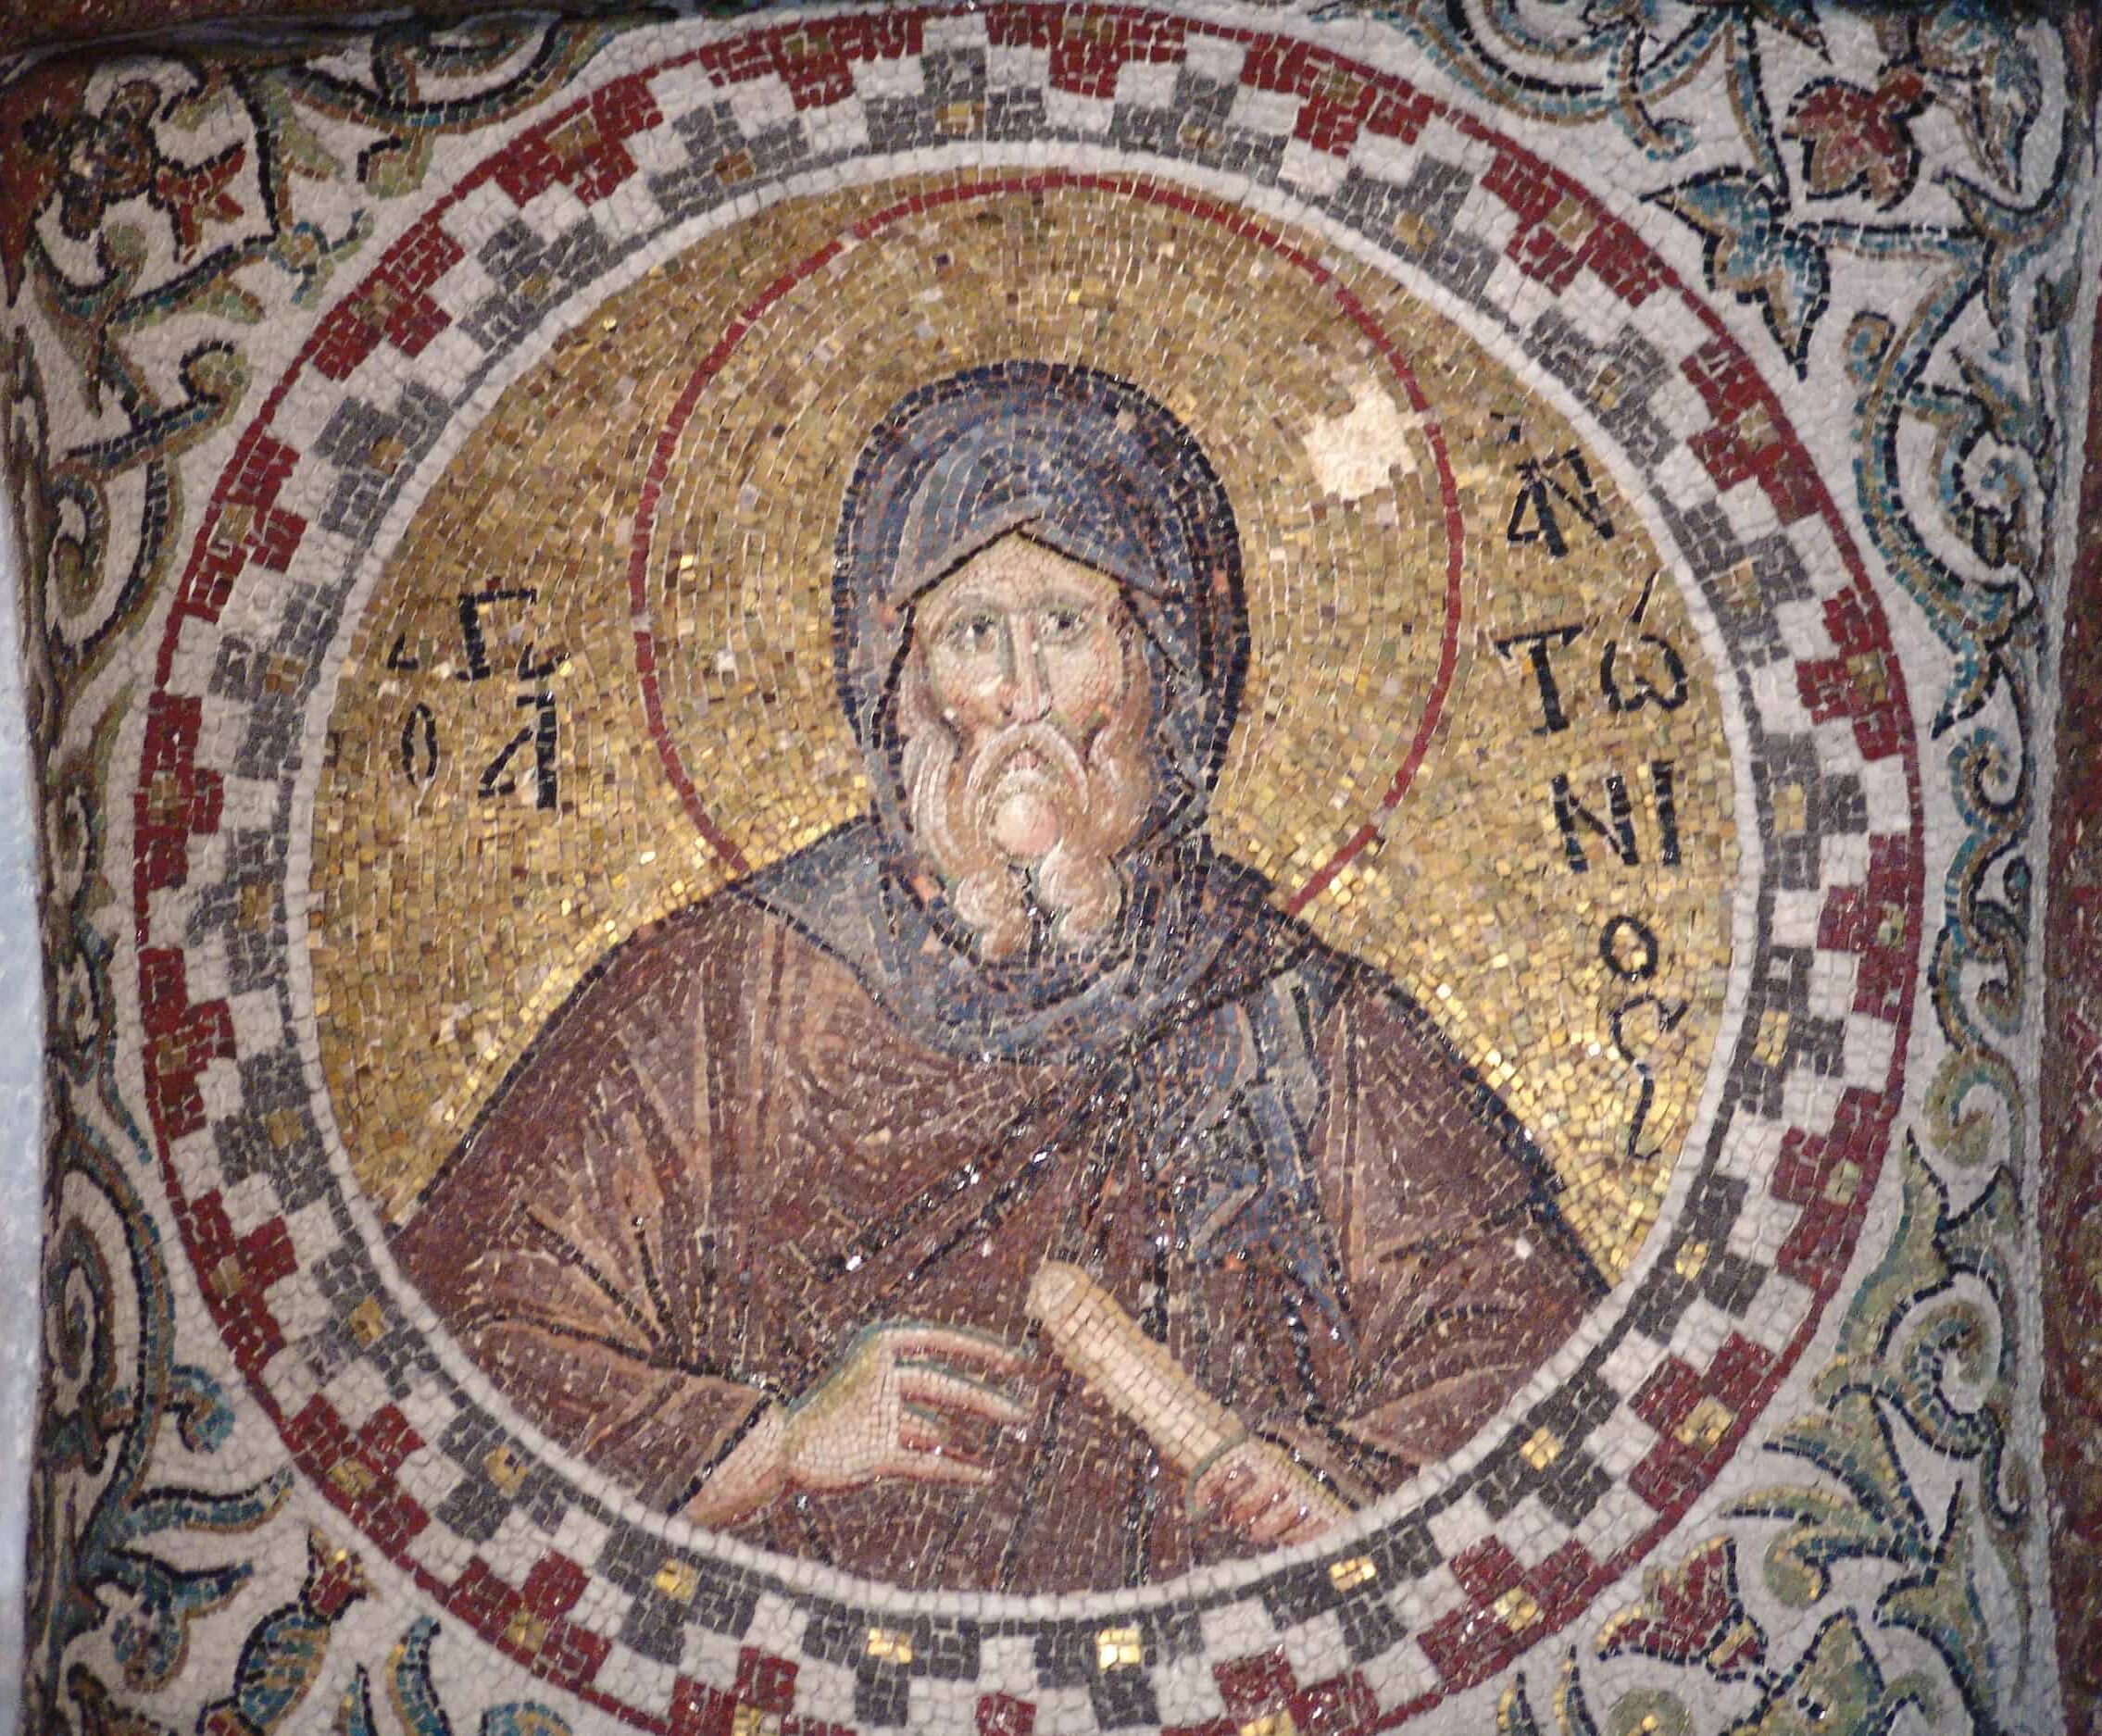 Mosaic of St. Anthony of the Desert